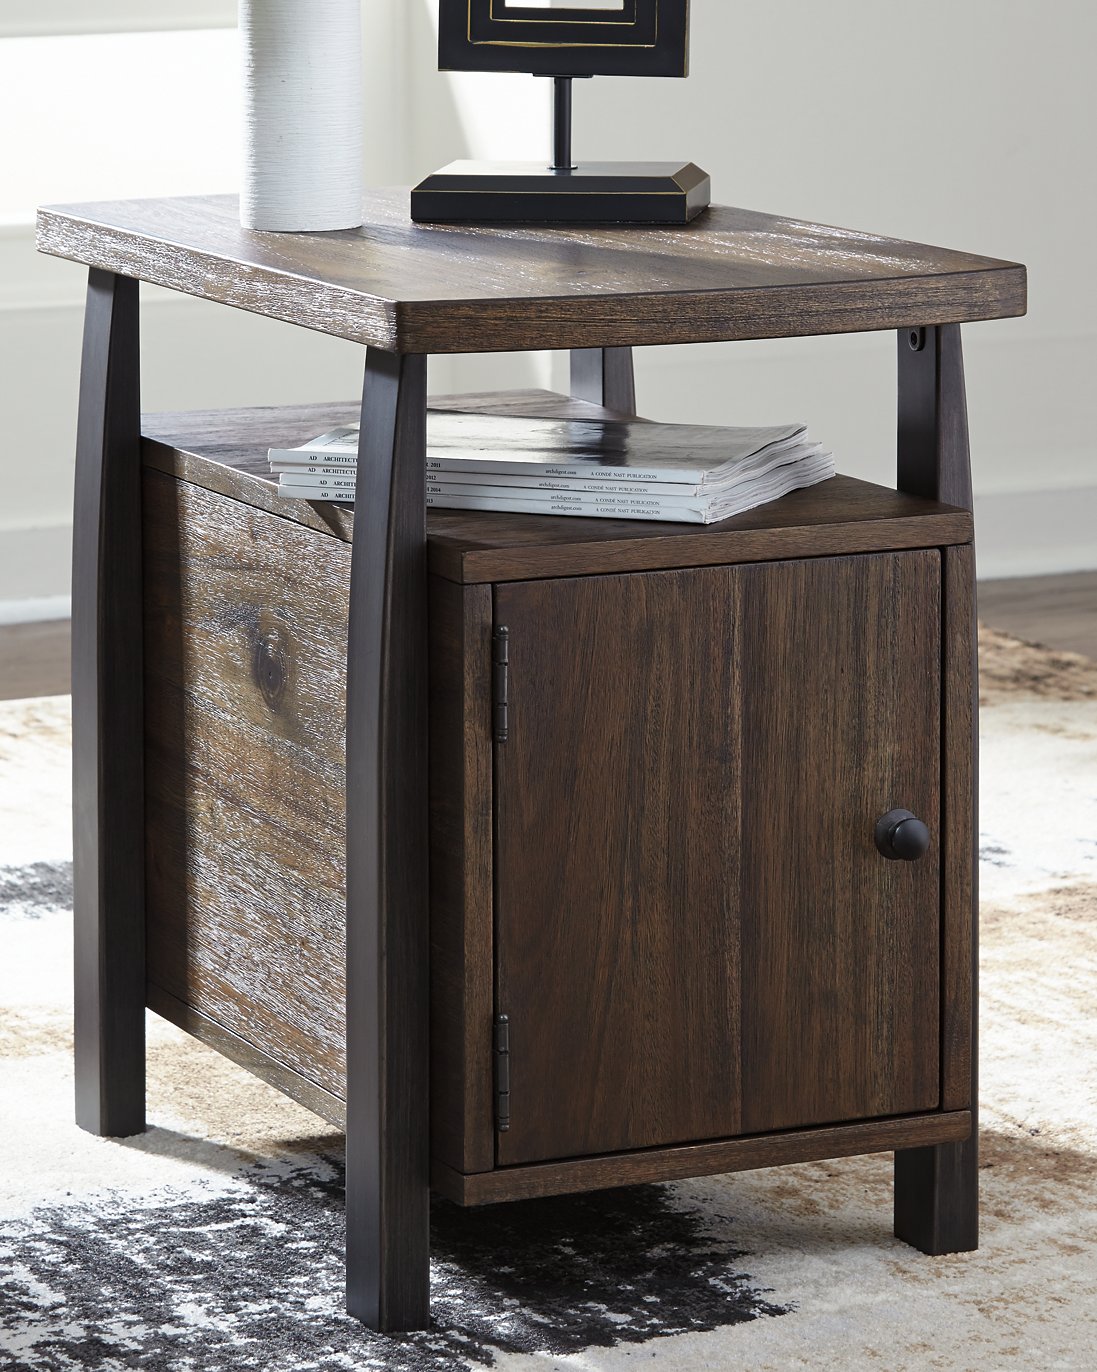 Vailbry Chairside End Table - Half Price Furniture